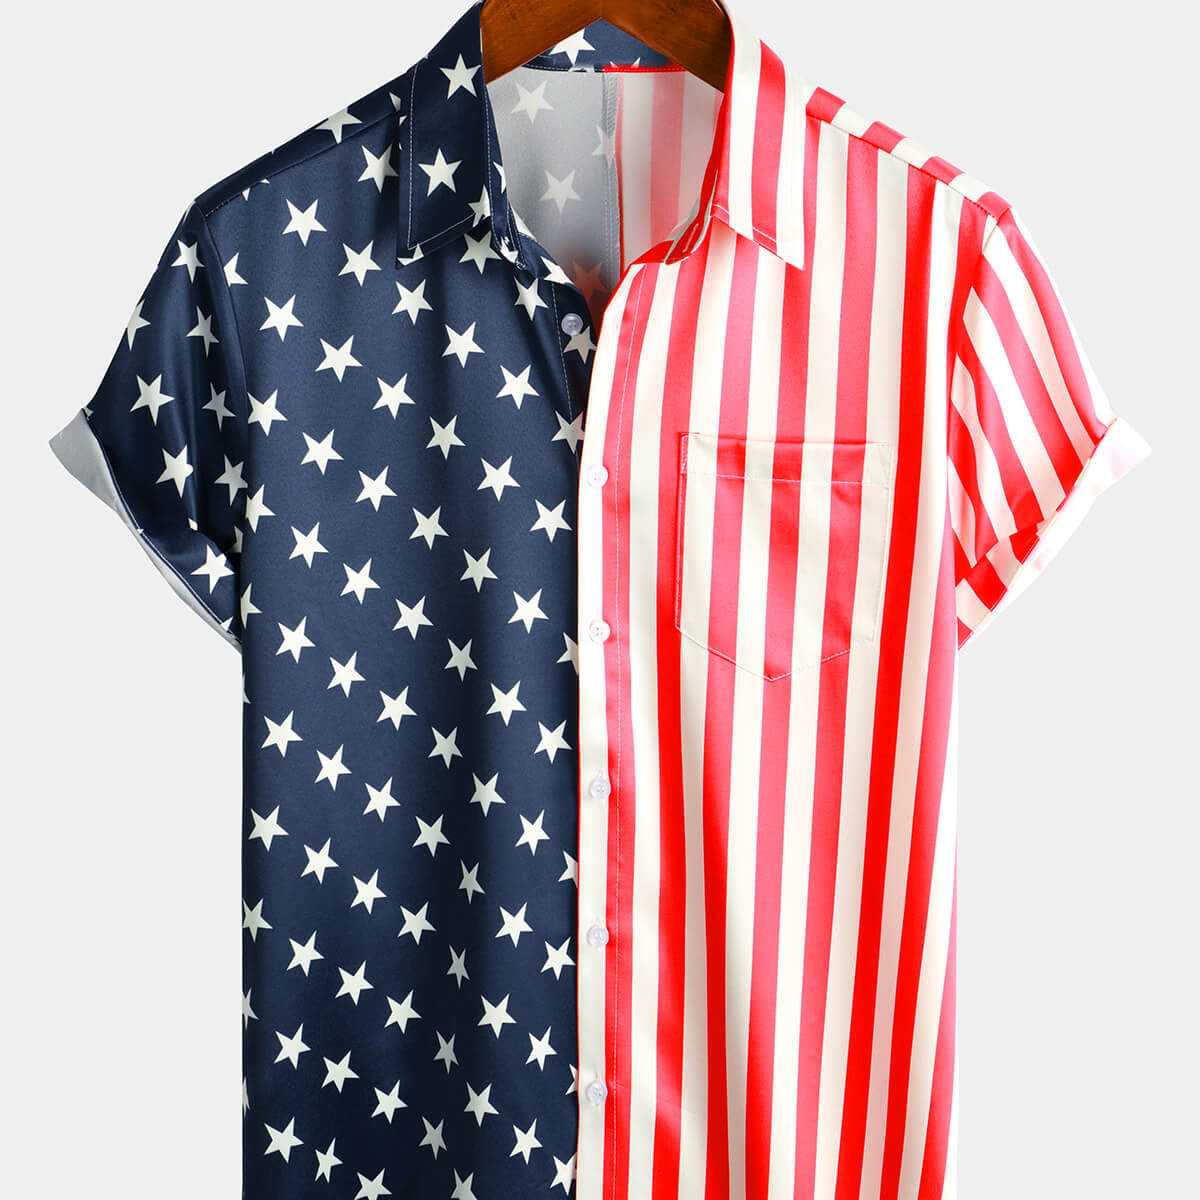 Men's Casual Holiday Striped Print American Flag USA Patriotic Button Short Sleeve Shirt